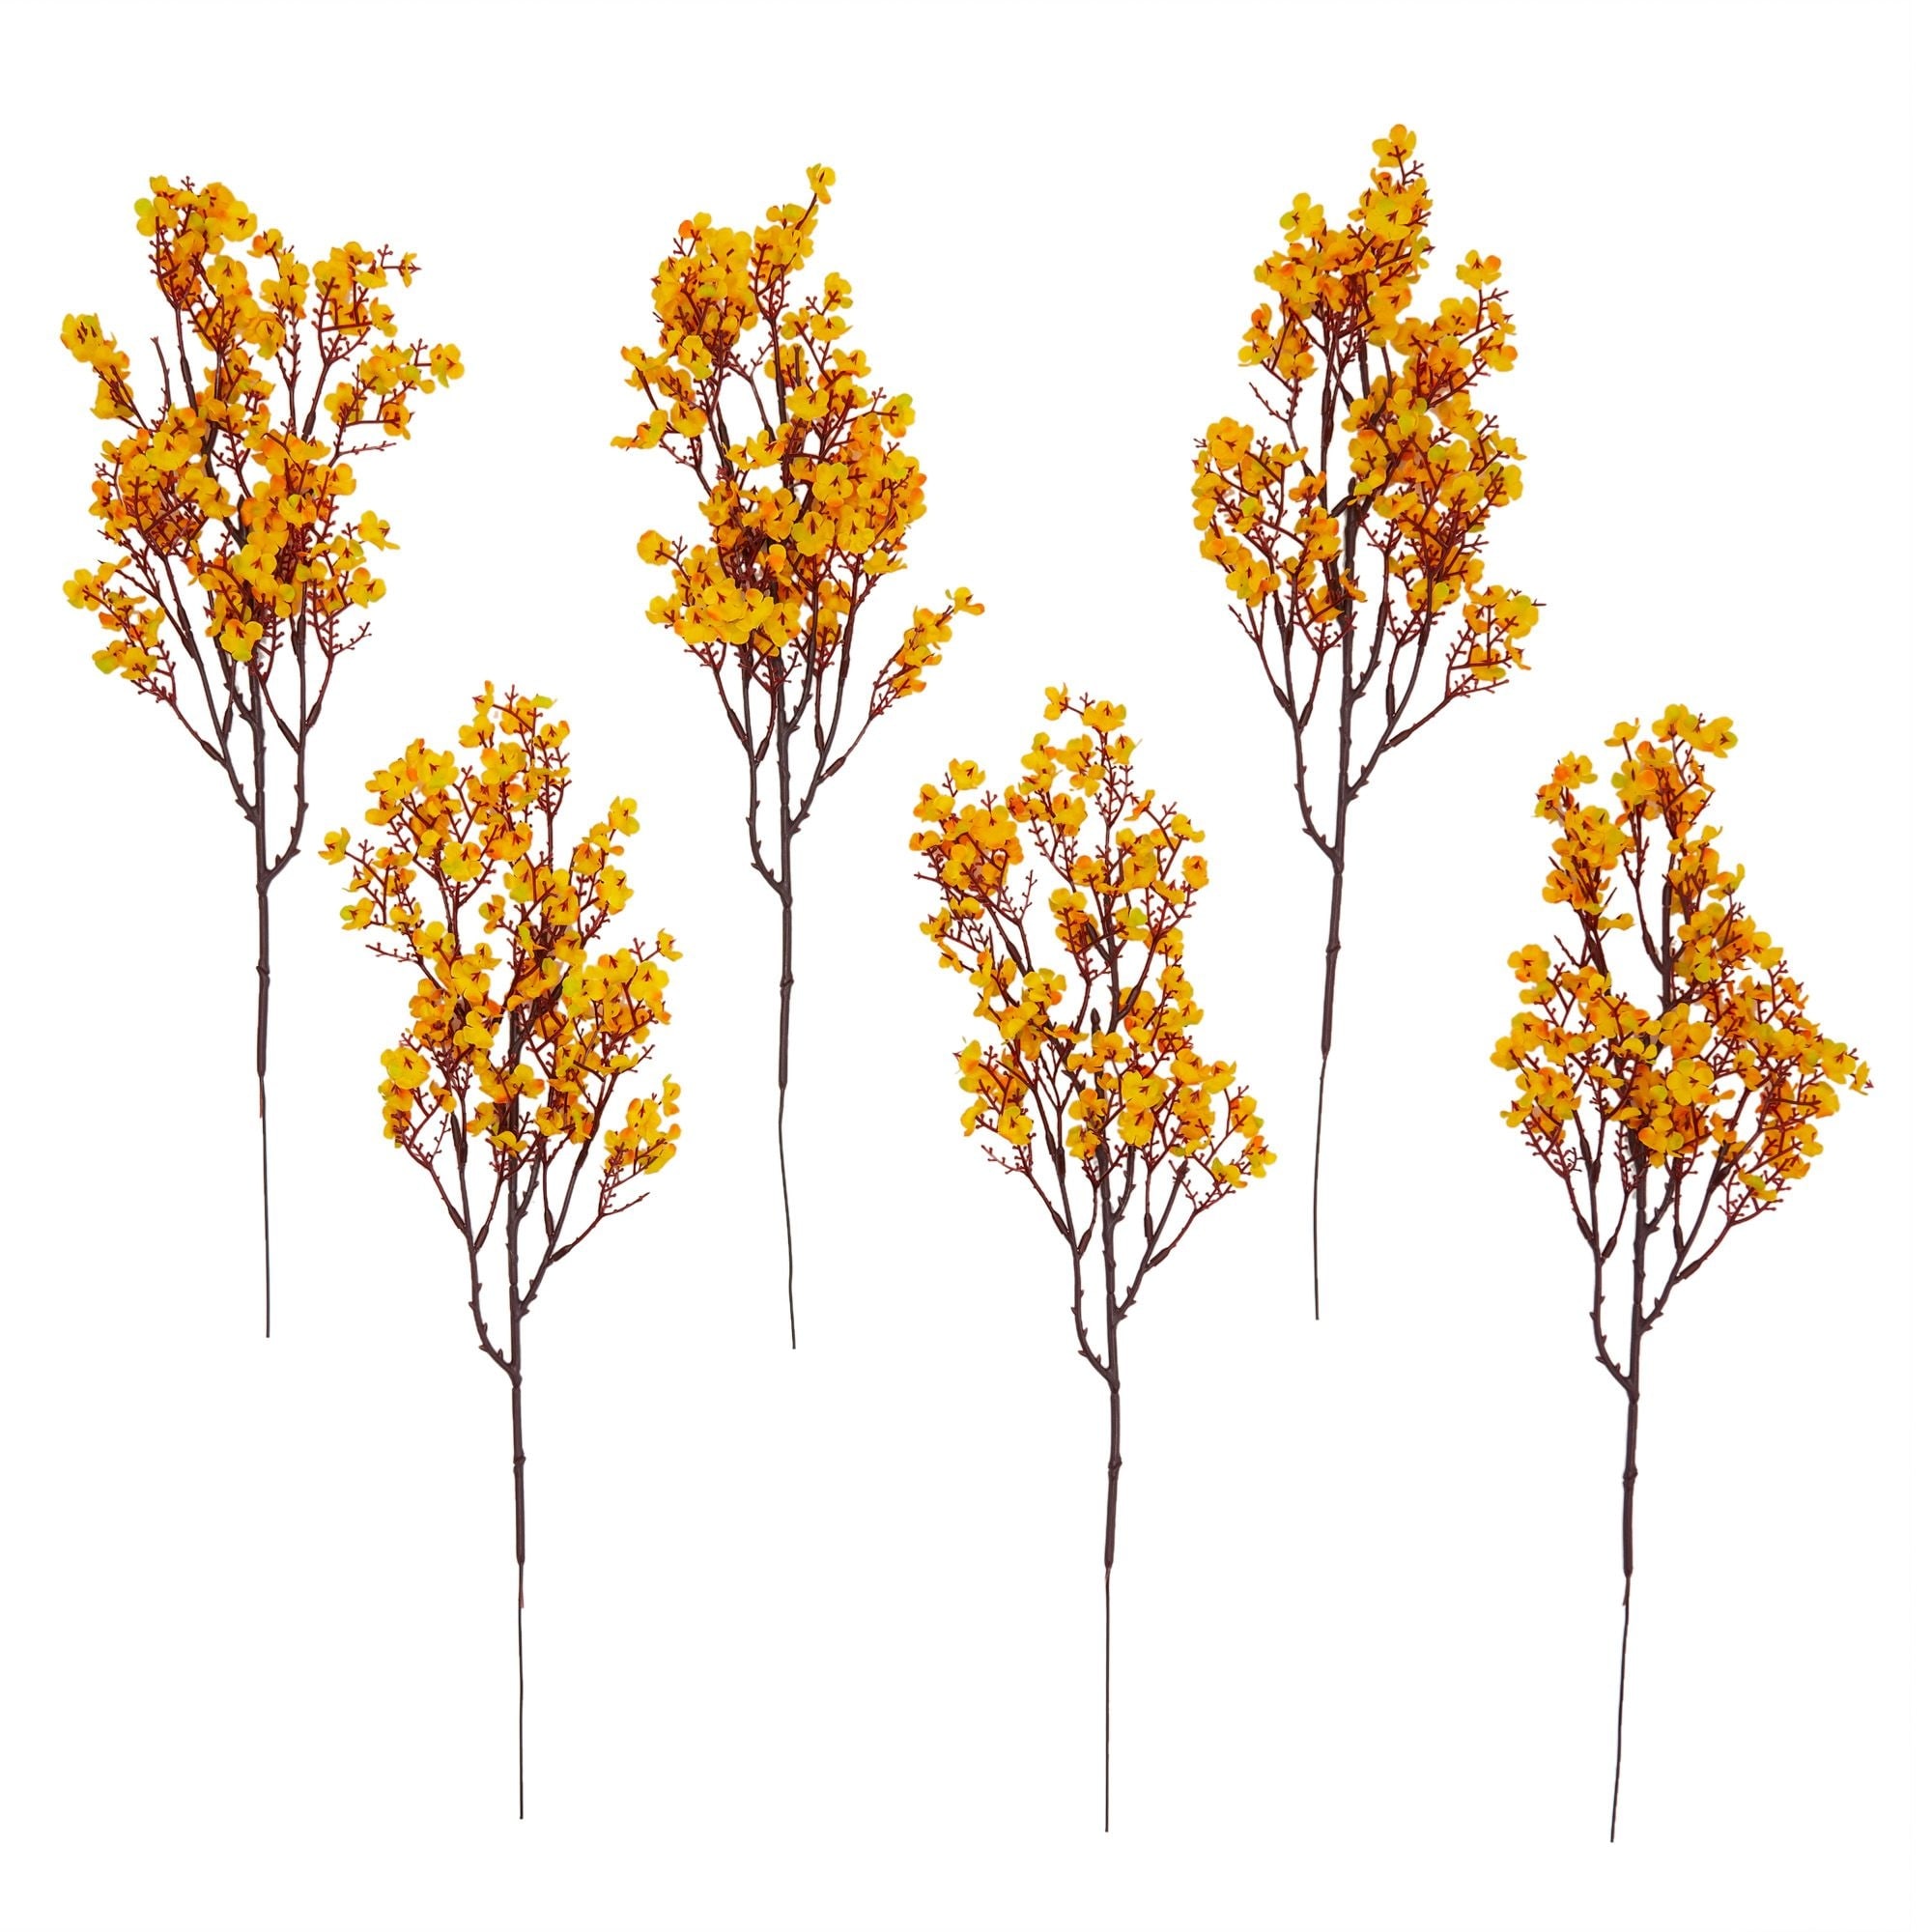 Silk Artificial Baby's Breath Flowers with Stem, Orange Babies Breath  Bouquets (20 In, 6 Pack)